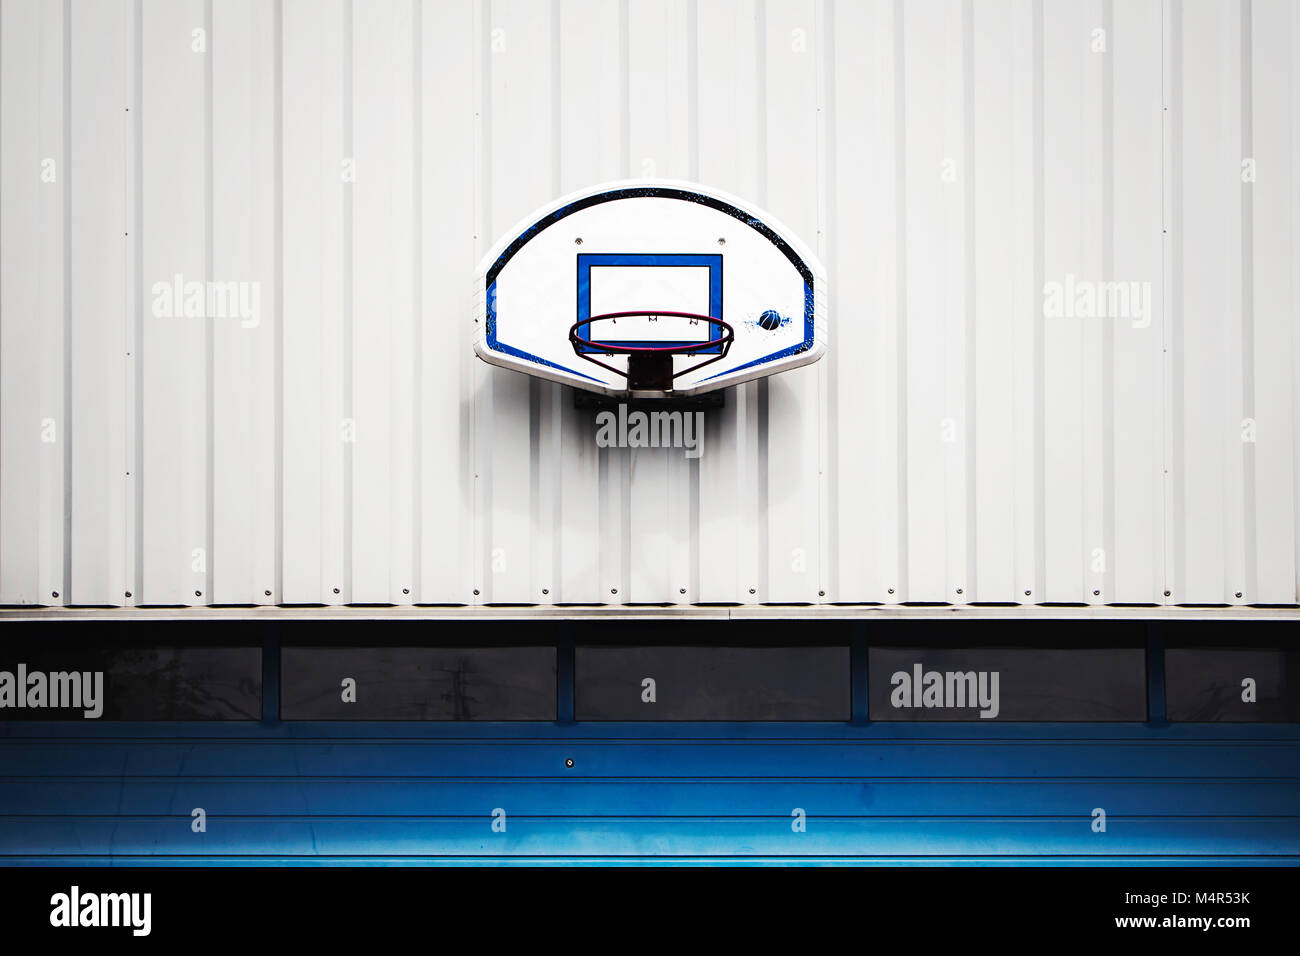 Basketball hoop fixed on a white wall above the blue garage door. Stock Photo